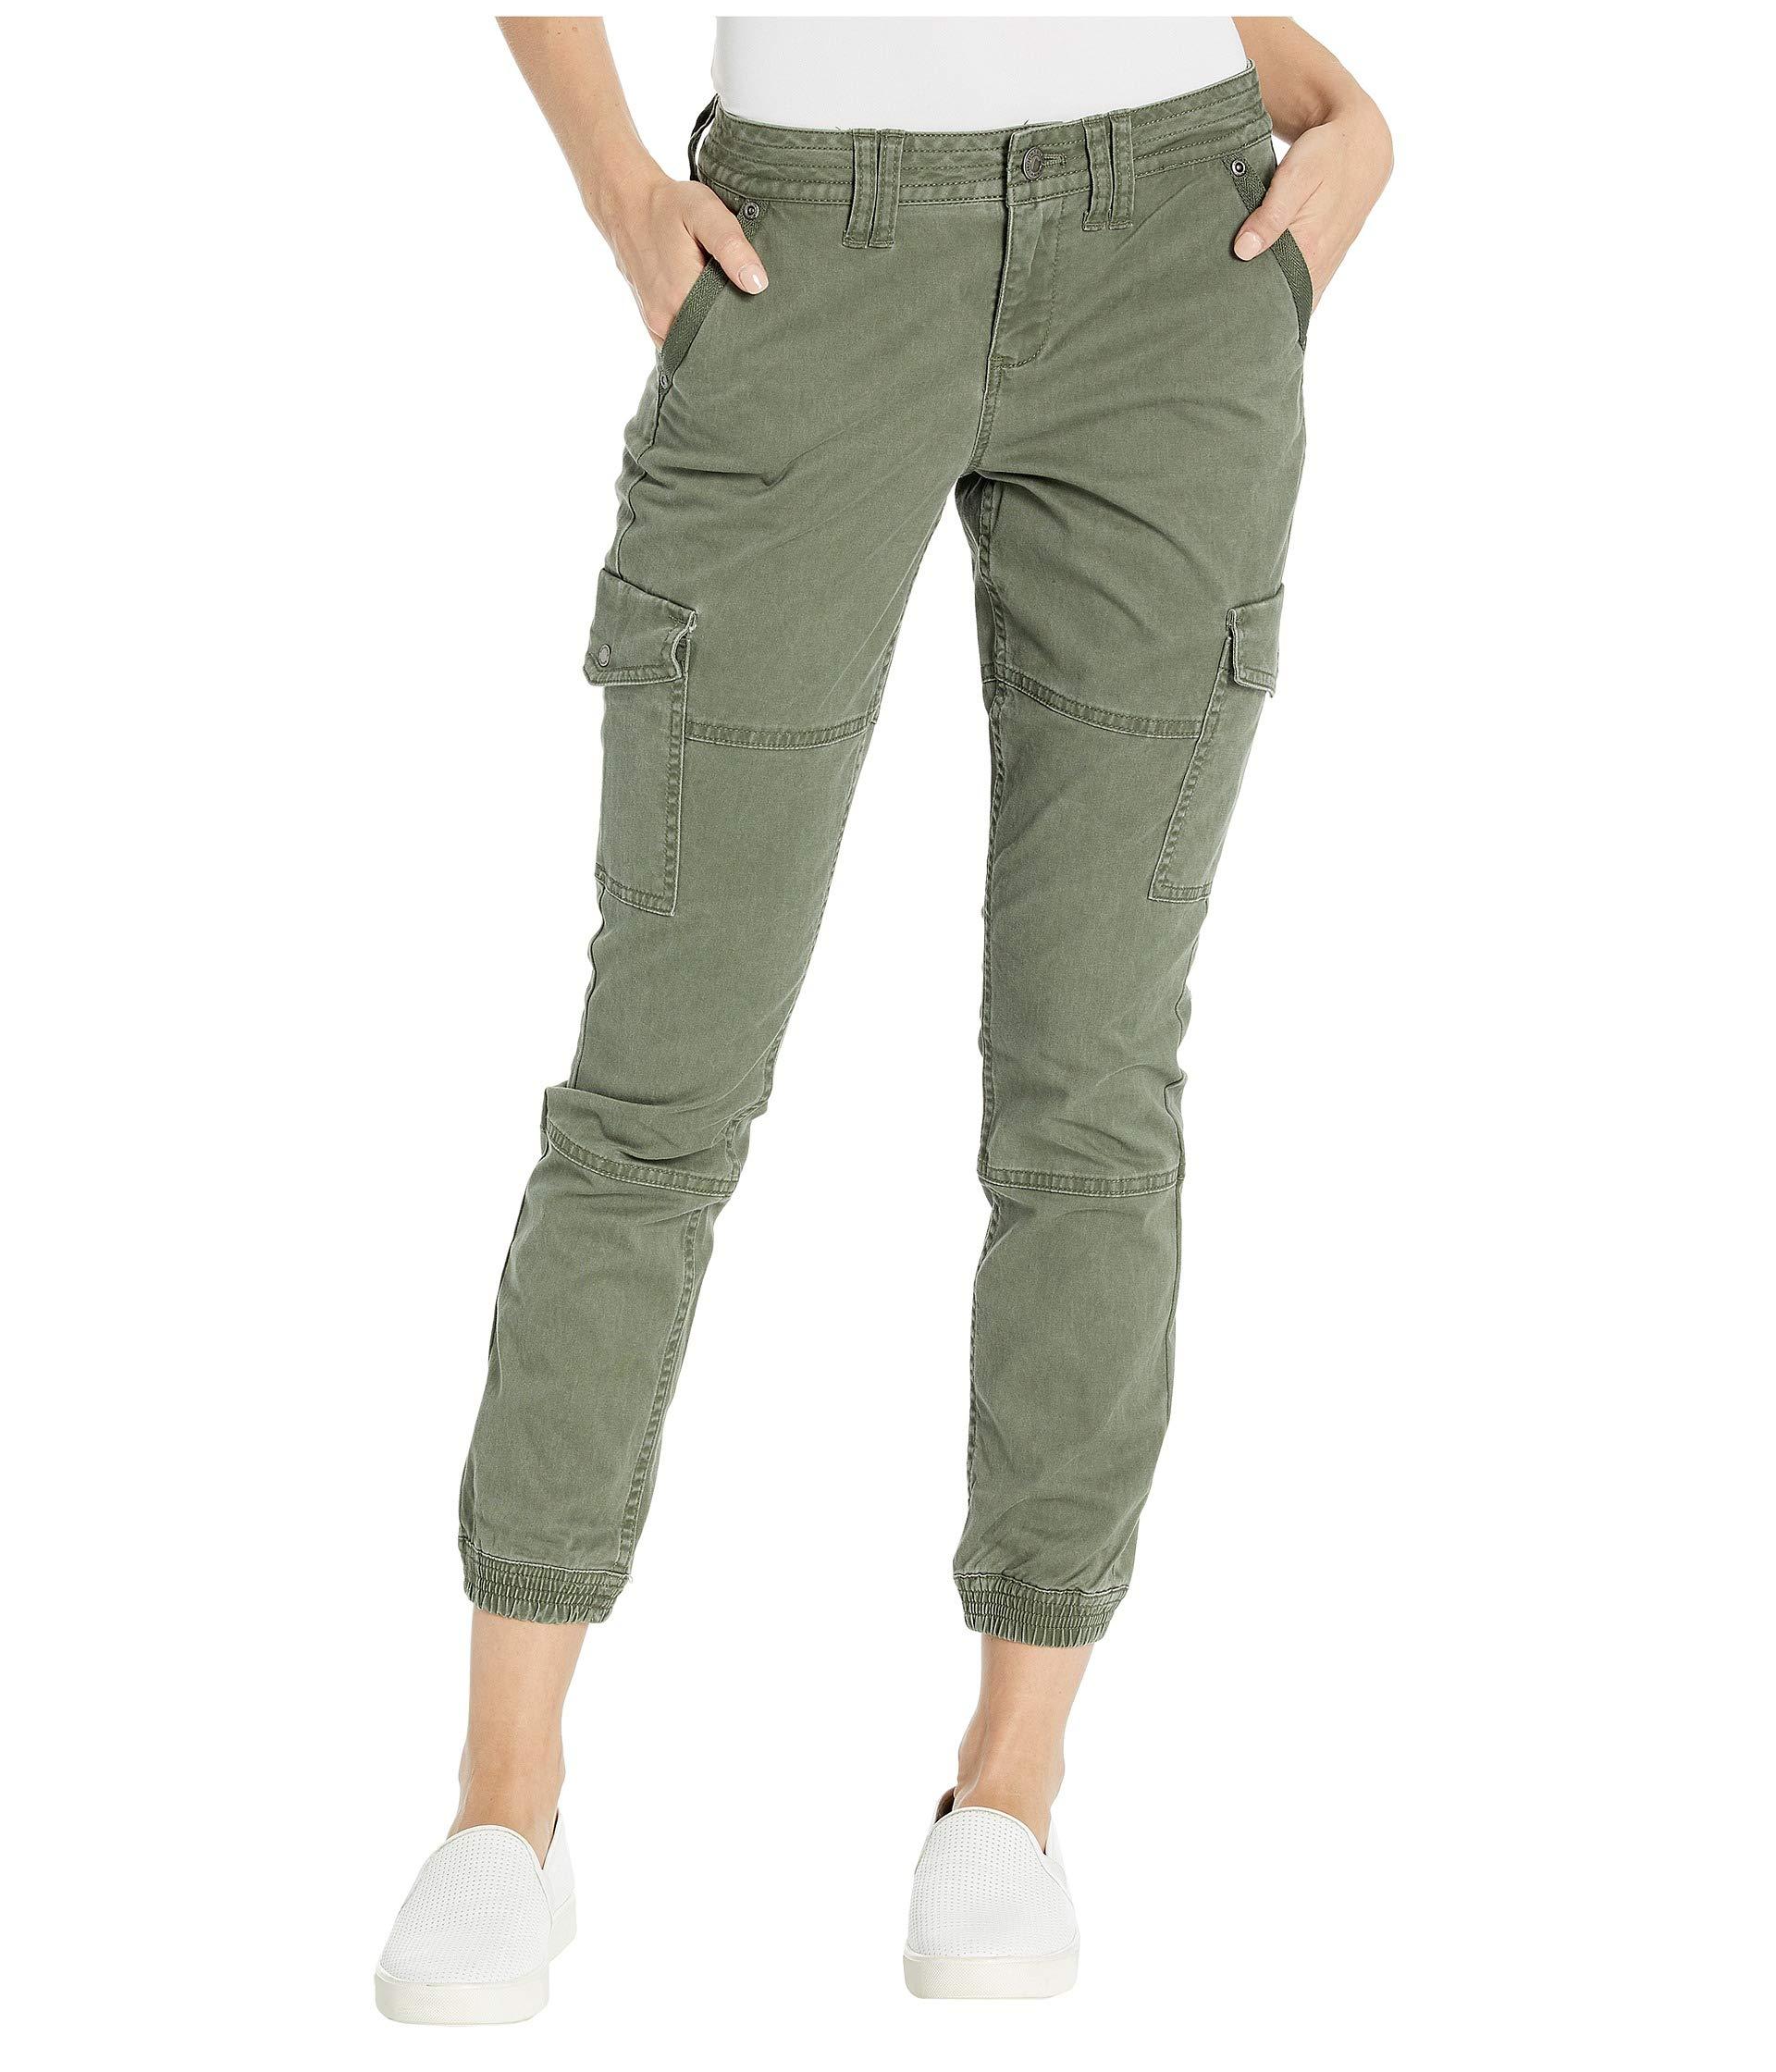 Mountain Khakis Cotton Calamity Cargo Pants Slim Fit in Green - Lyst